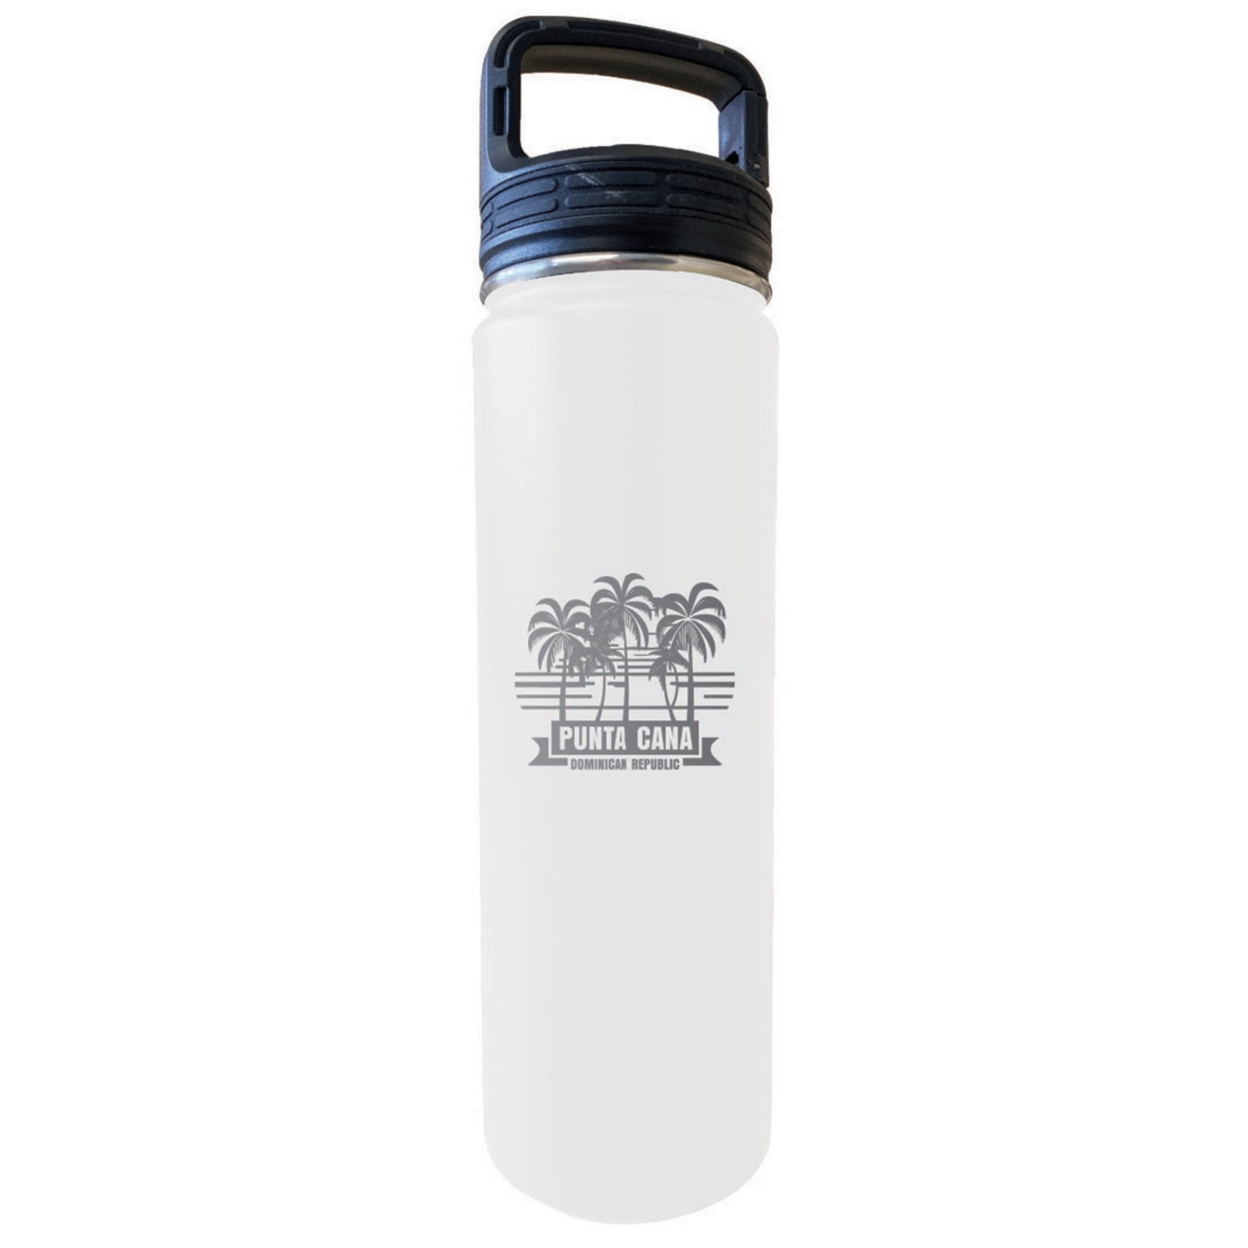 Punta Cana Dominican Republic Souvenir 32 Oz Insulated Stainless Steel Tumbler - White, Palm 2